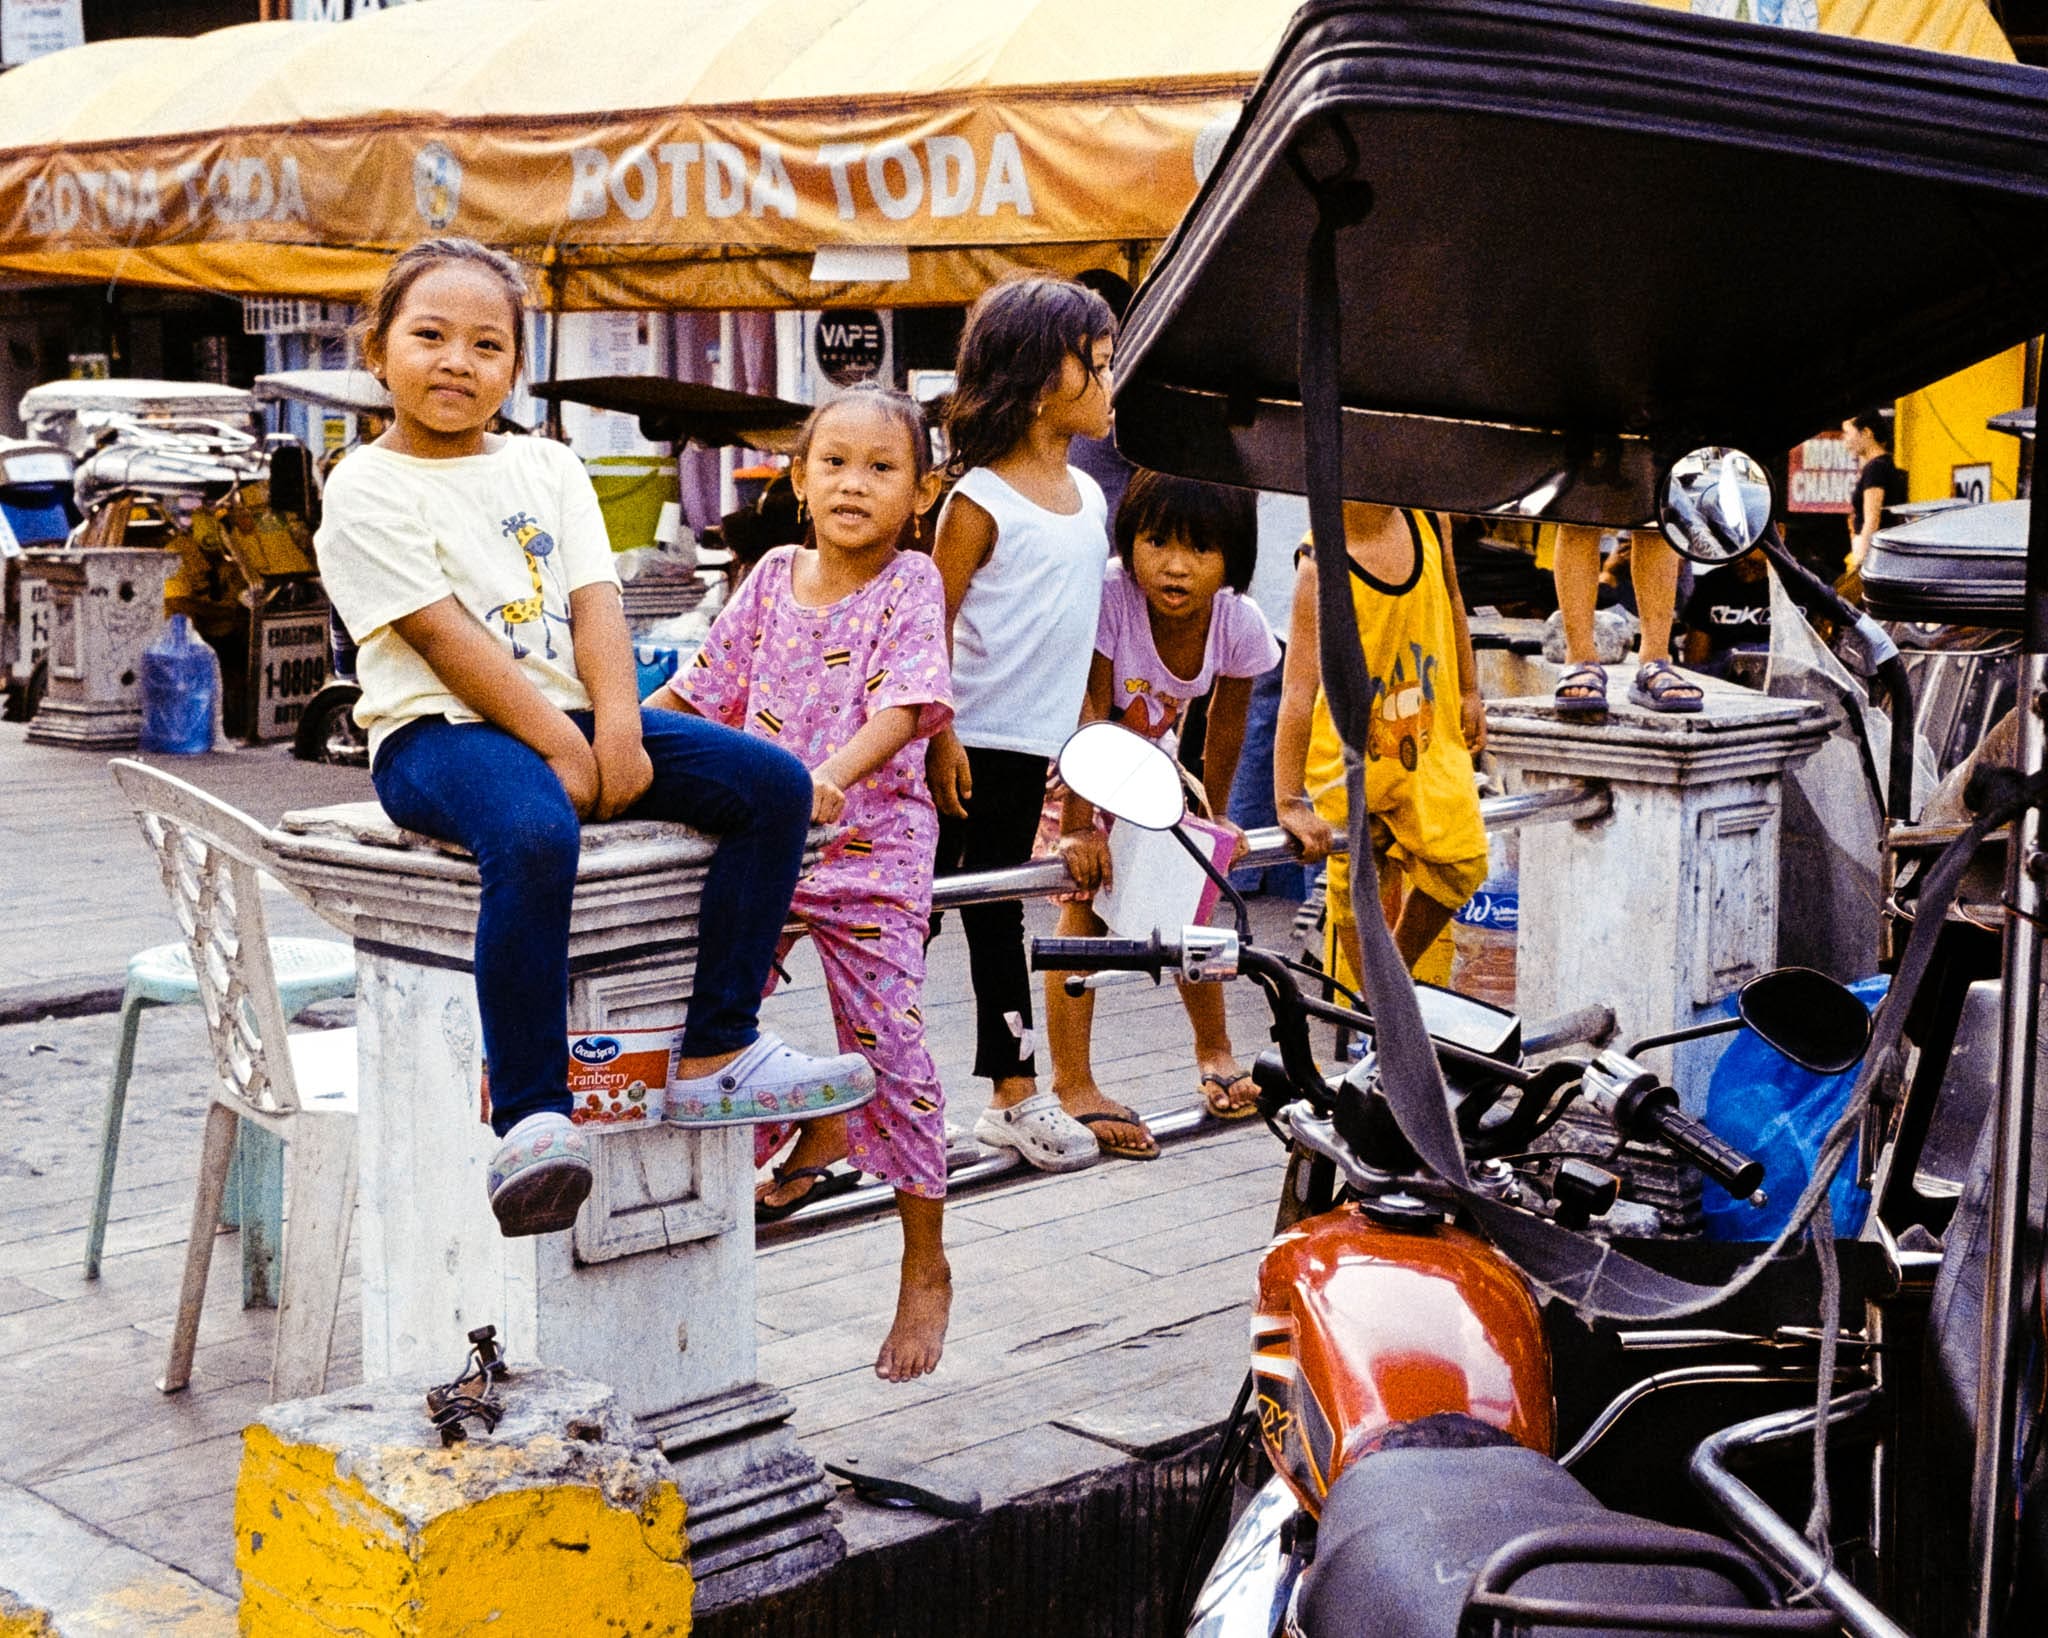 Three girls exploring local city market amidst colorful canopy and motorcycles